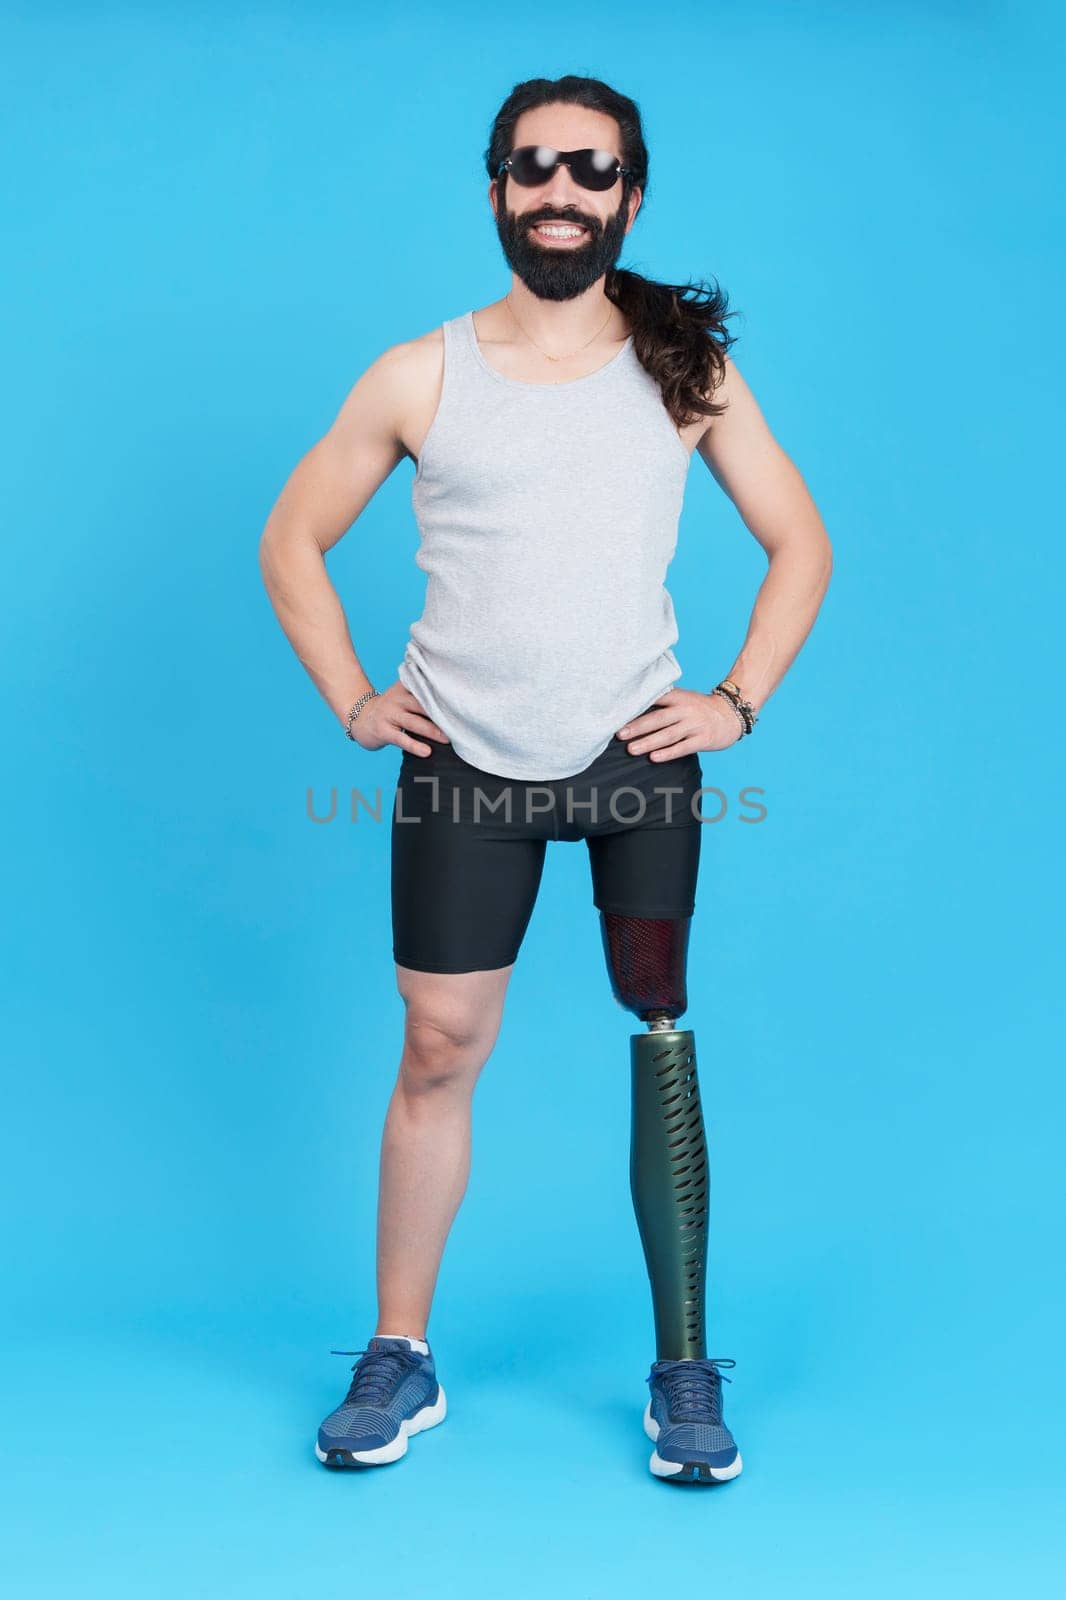 Vertical Studio portrait with blue background of a smiley man with sunglasses standing with a prosthetic leg